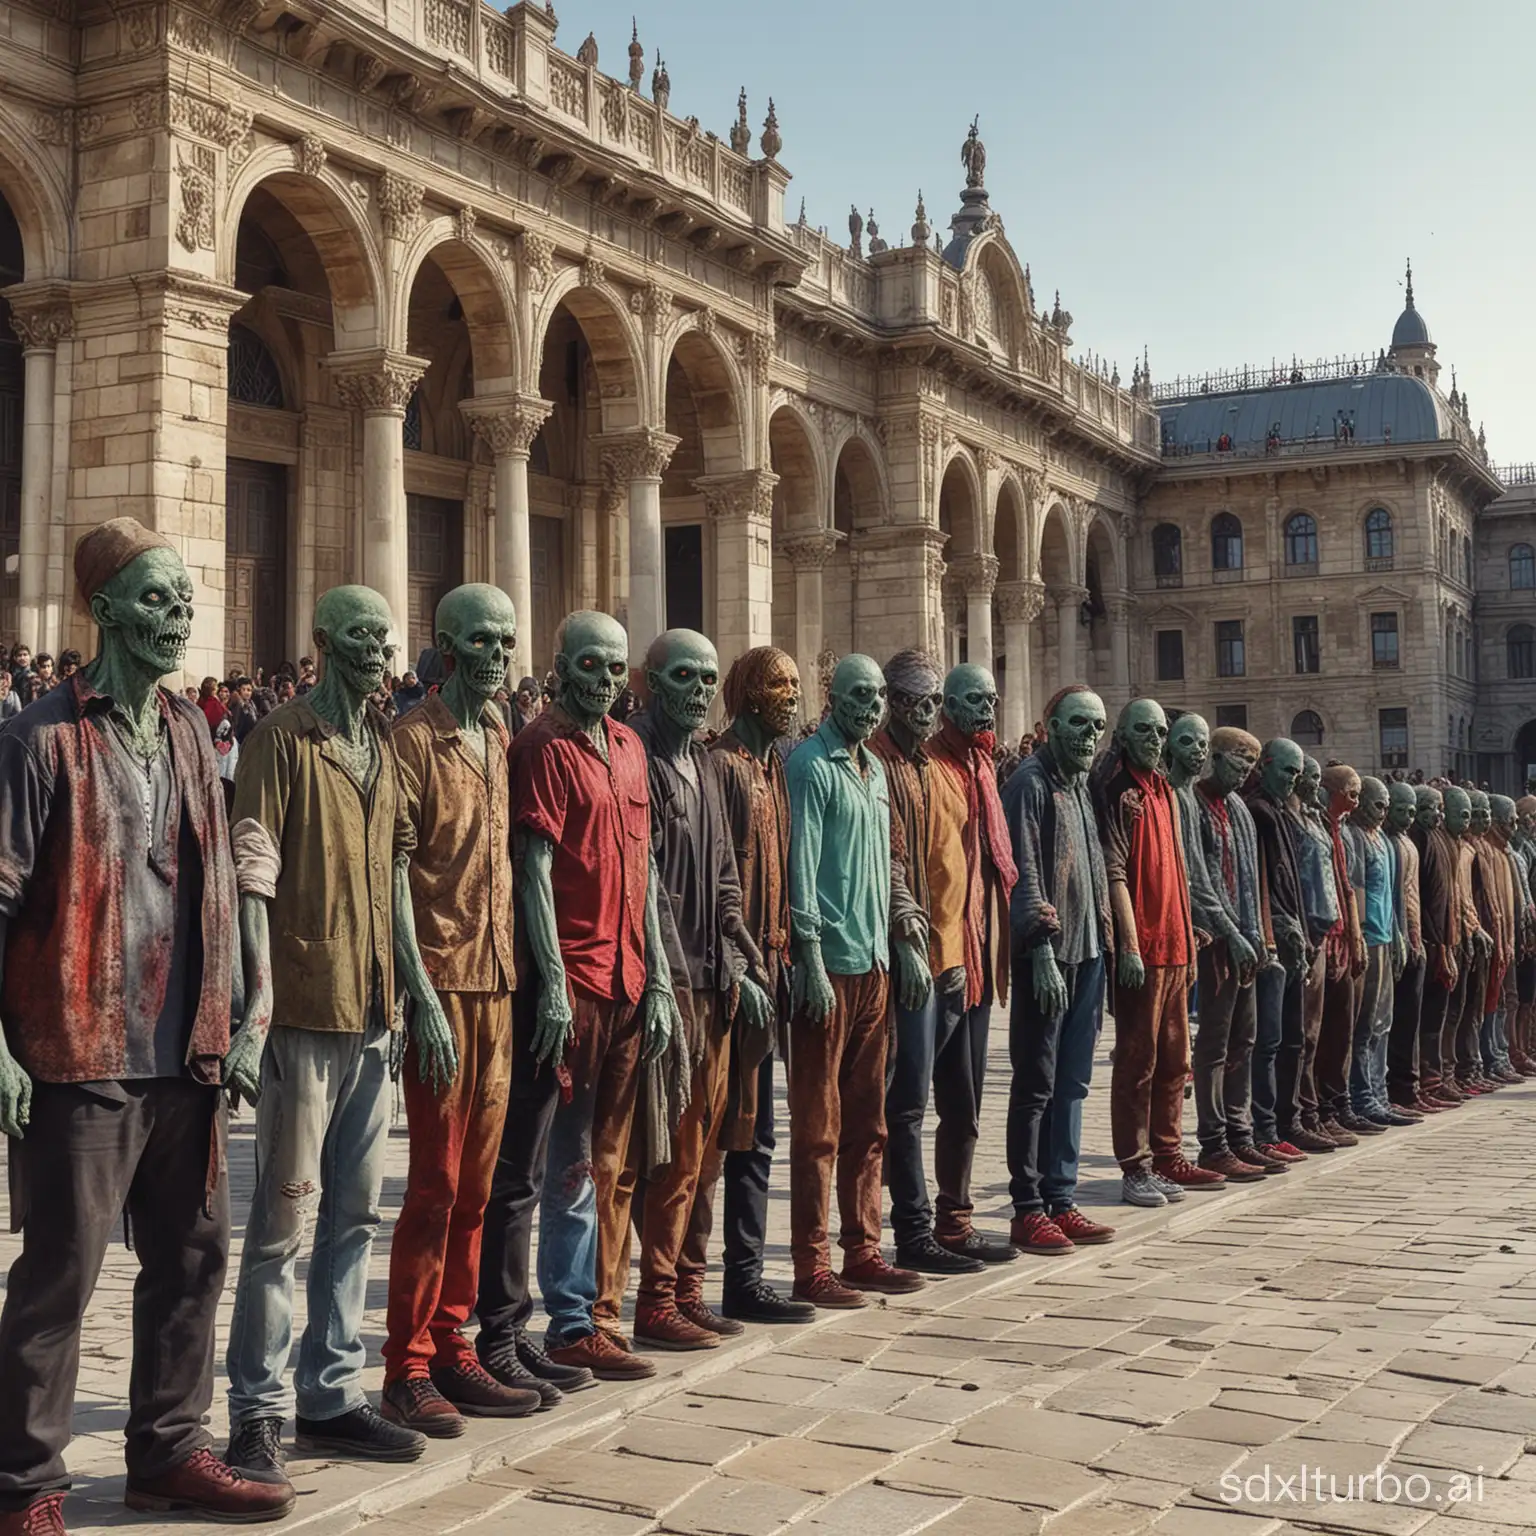 Draw zombies waiting in line in front of the Istanbul Toprakları Palace, let this be a realistic and colorful picture